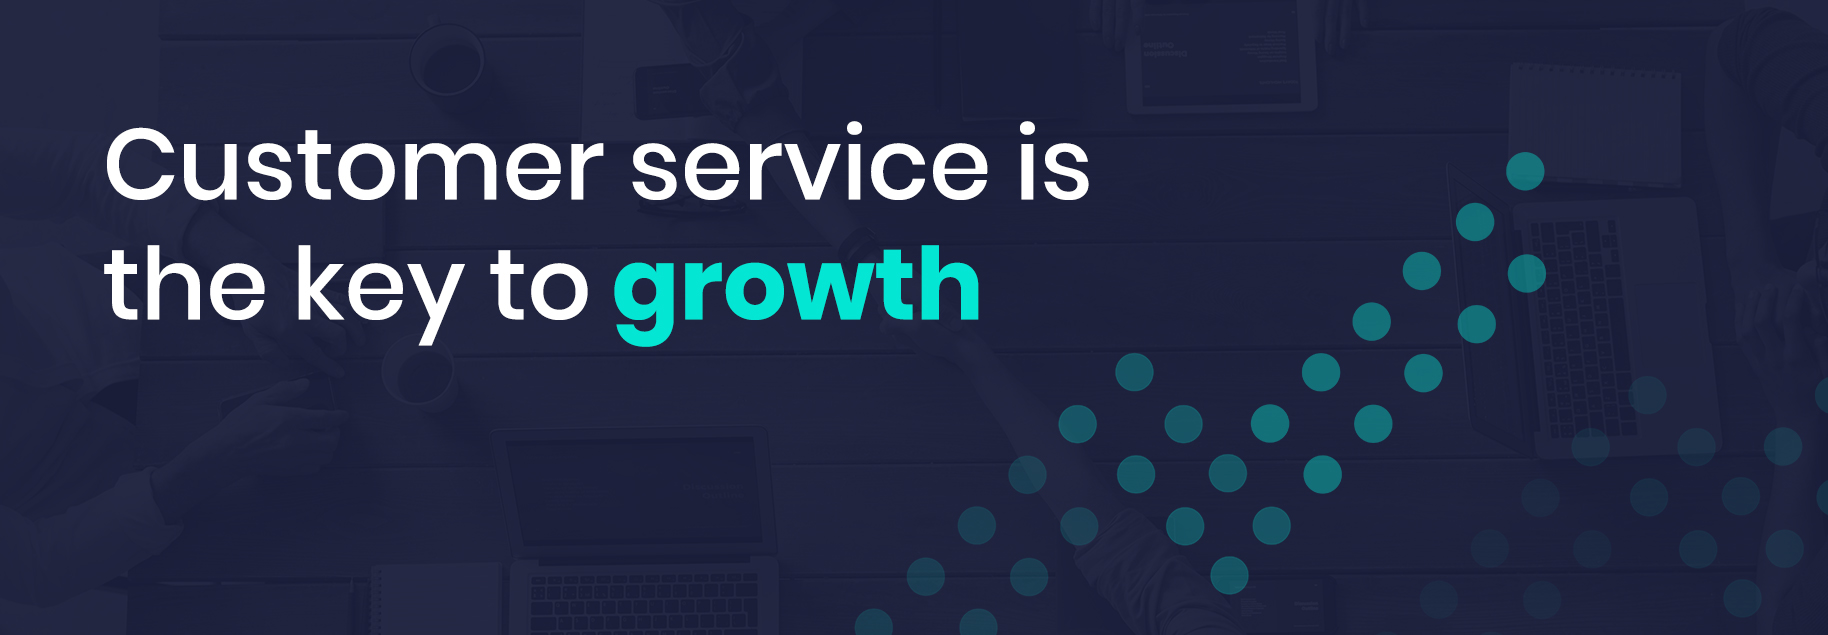 Customer service is the key to growth